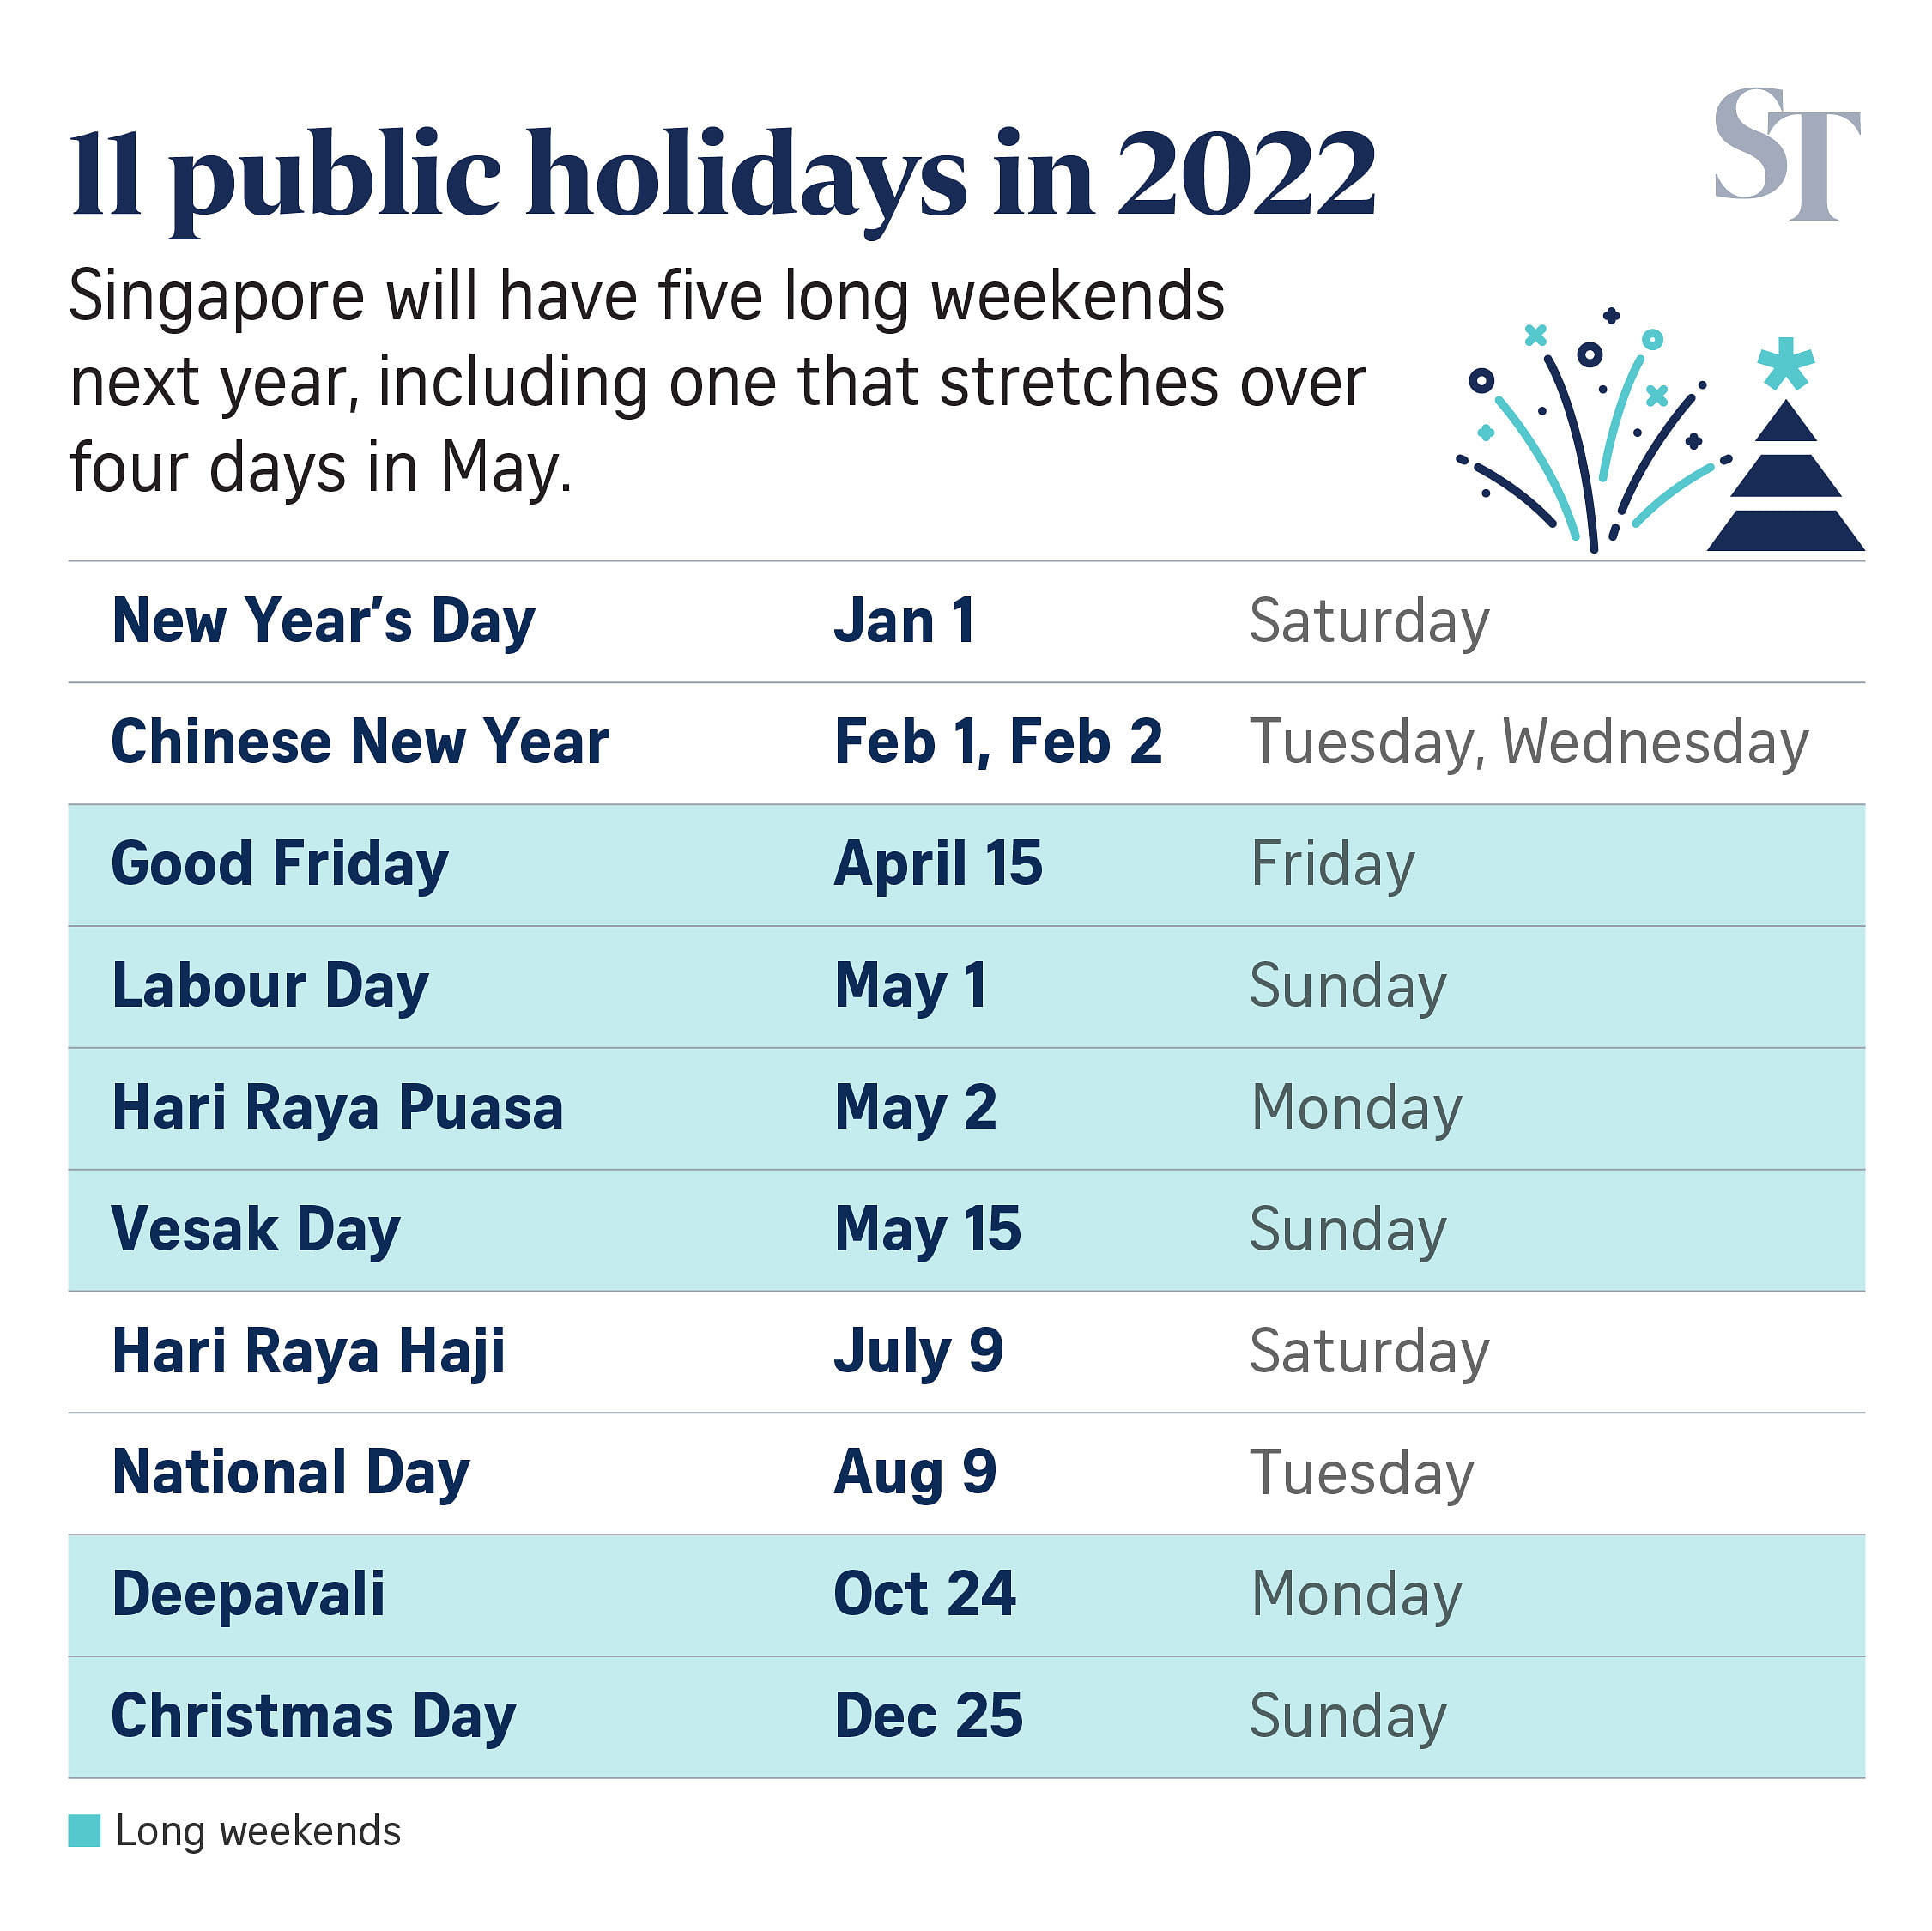 singapore-to-have-five-long-public-holiday-weekends-in-2022-amid-hopes